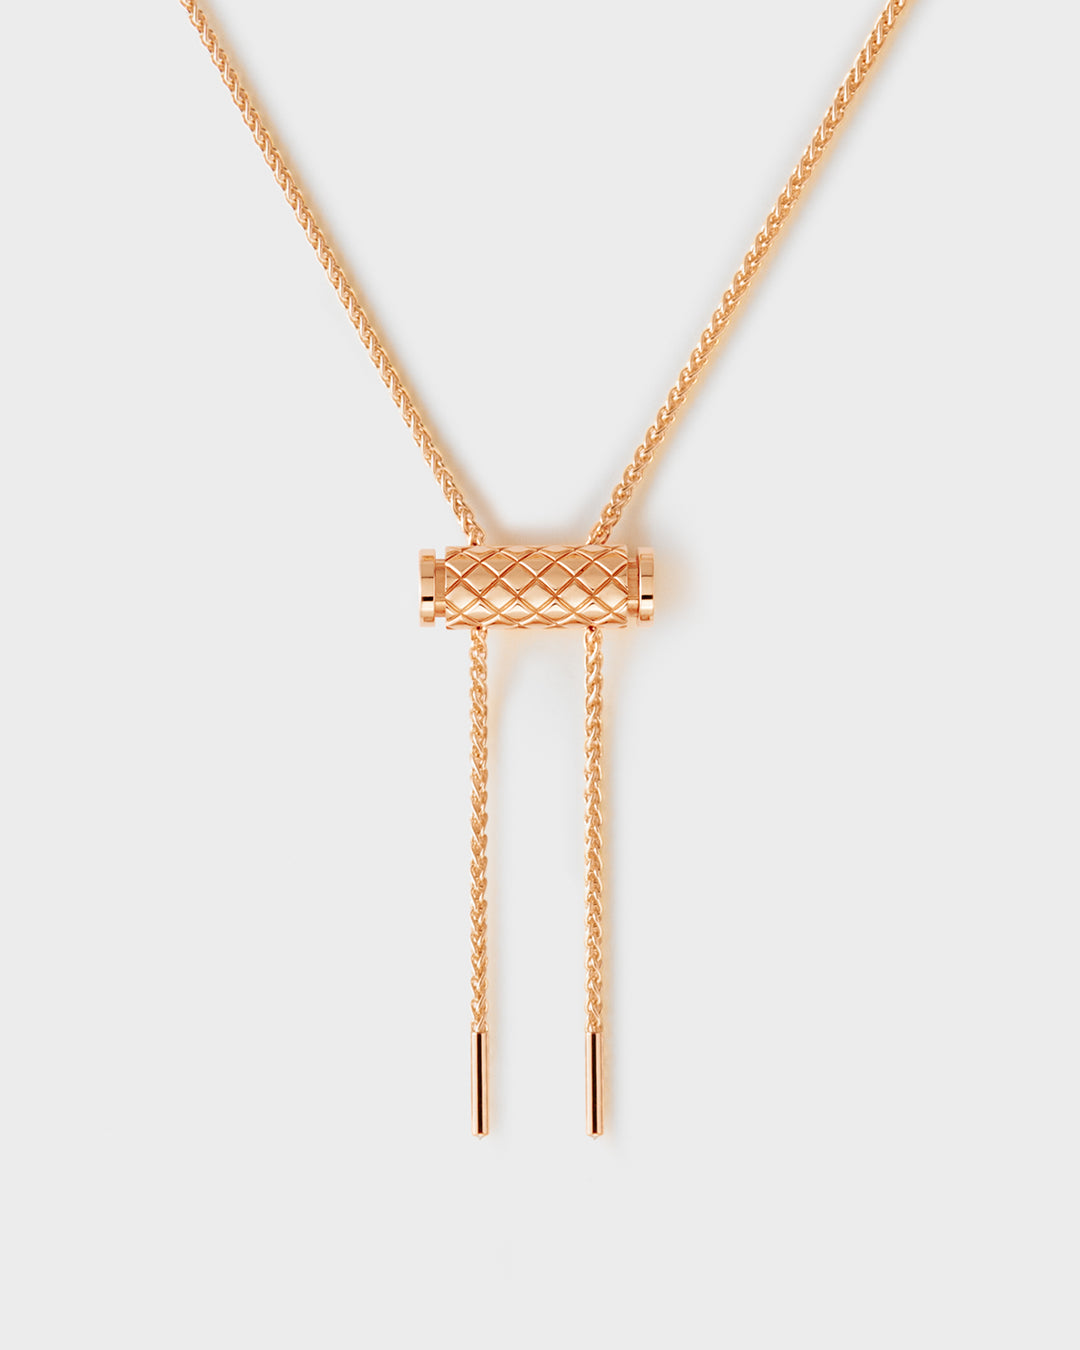 Gold Latch Pendant on MM Chain in Rose Gold - 1 - Nouvel Heritage